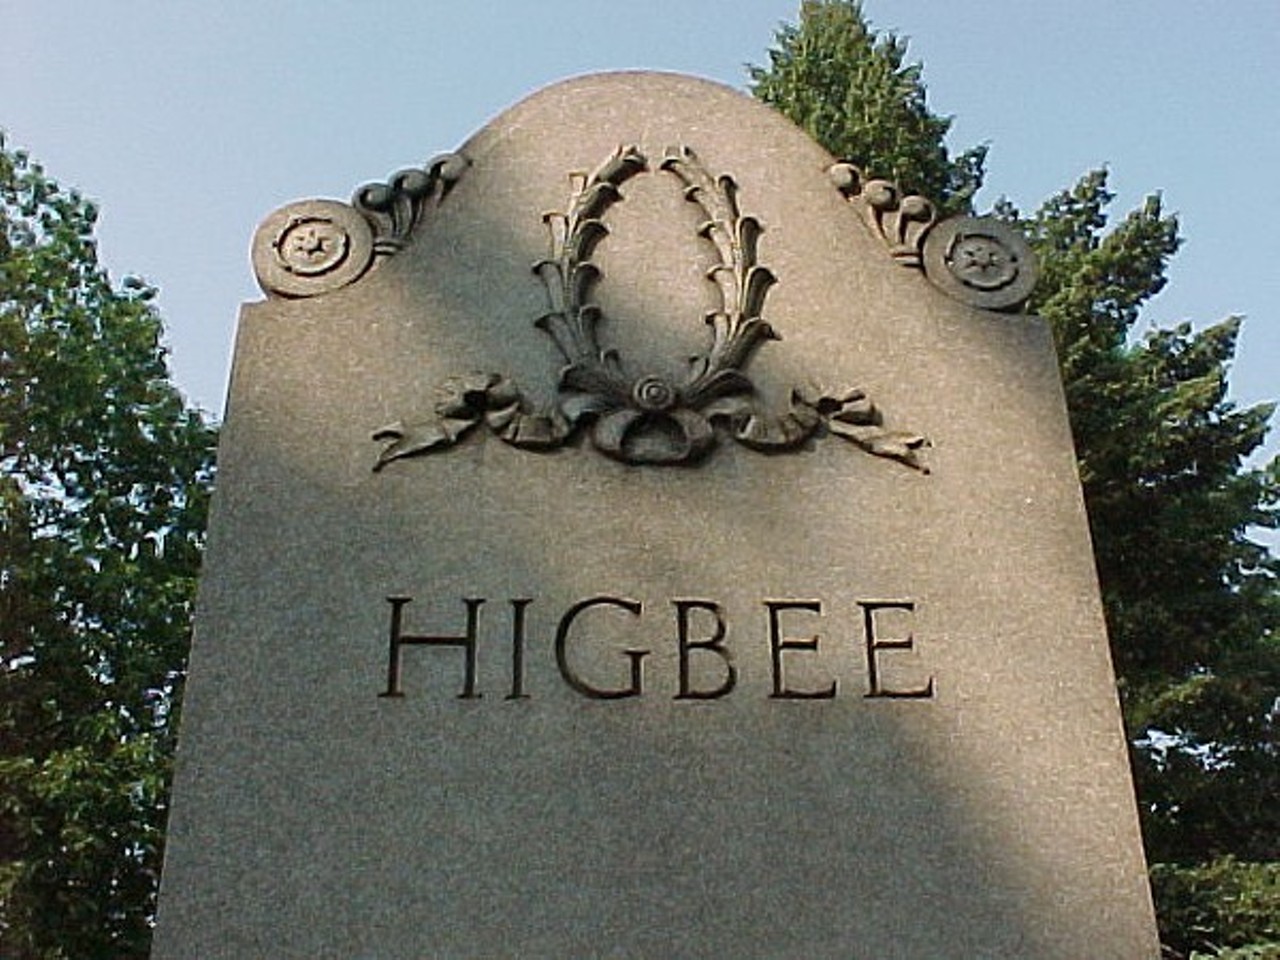 Edwin Converse Higbee (1837-1906) - Lakeview Cemetery 
Responsible for spreading department stores throughout northeast Ohio, Higbee became a stepping stone for Dillards. He started out with a dry-goods and clothing store called Hower & Higbee. Long after his death, the Higbee name remained until Dillards bought the company.